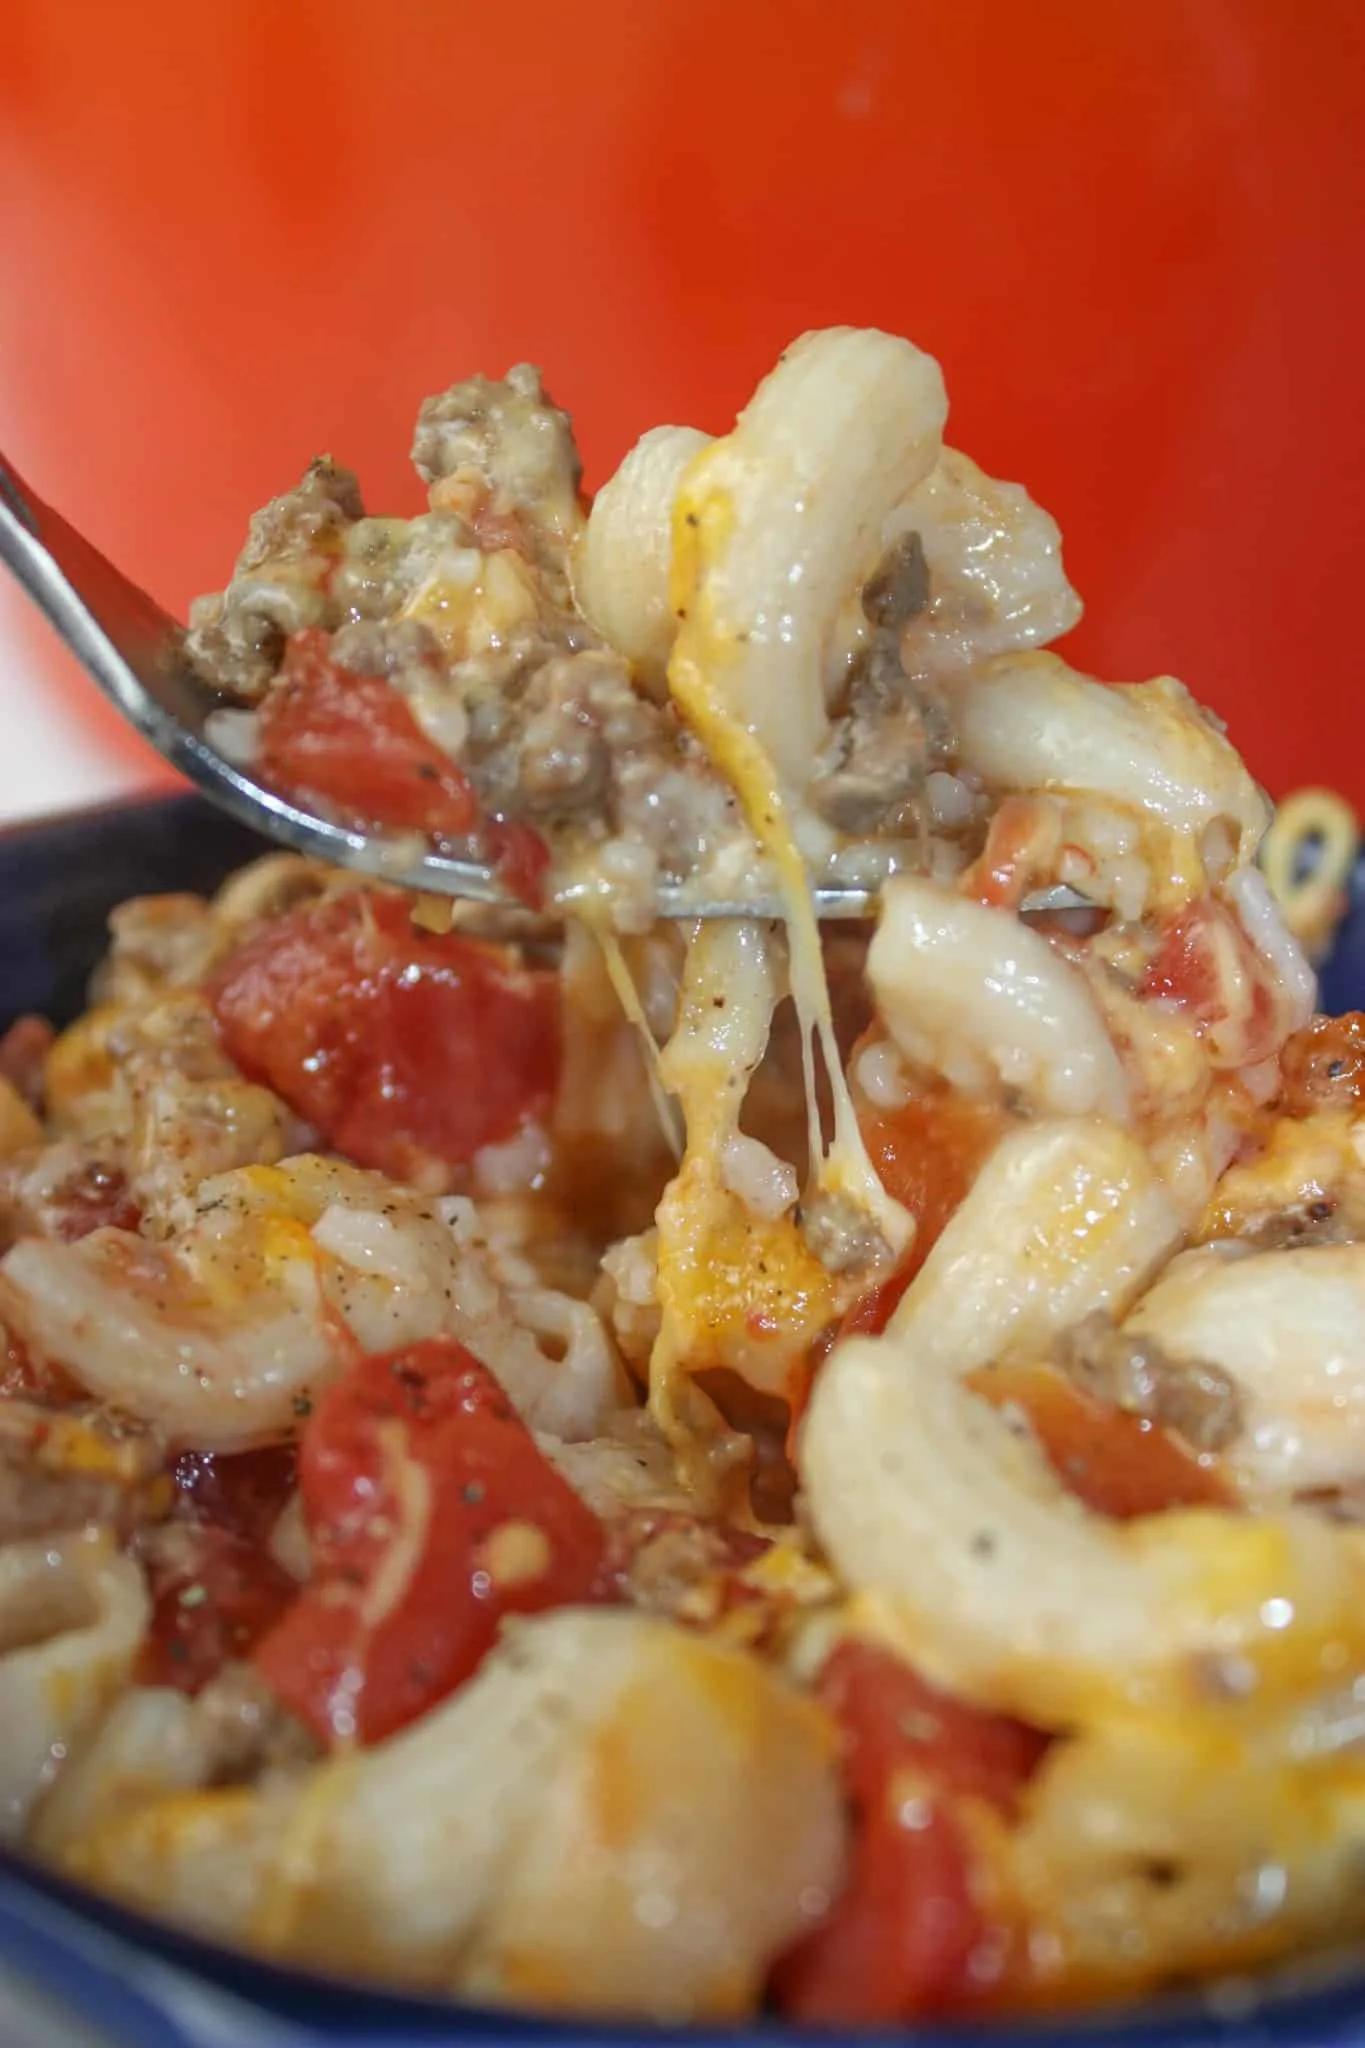 Baked Macaroni and Cheese is a quick and easy recipe your whole family will enjoy.  This gluten free meal is loaded with elbow pasta, ground beef, tomato and cheese to create a hearty meal for any day of the week.